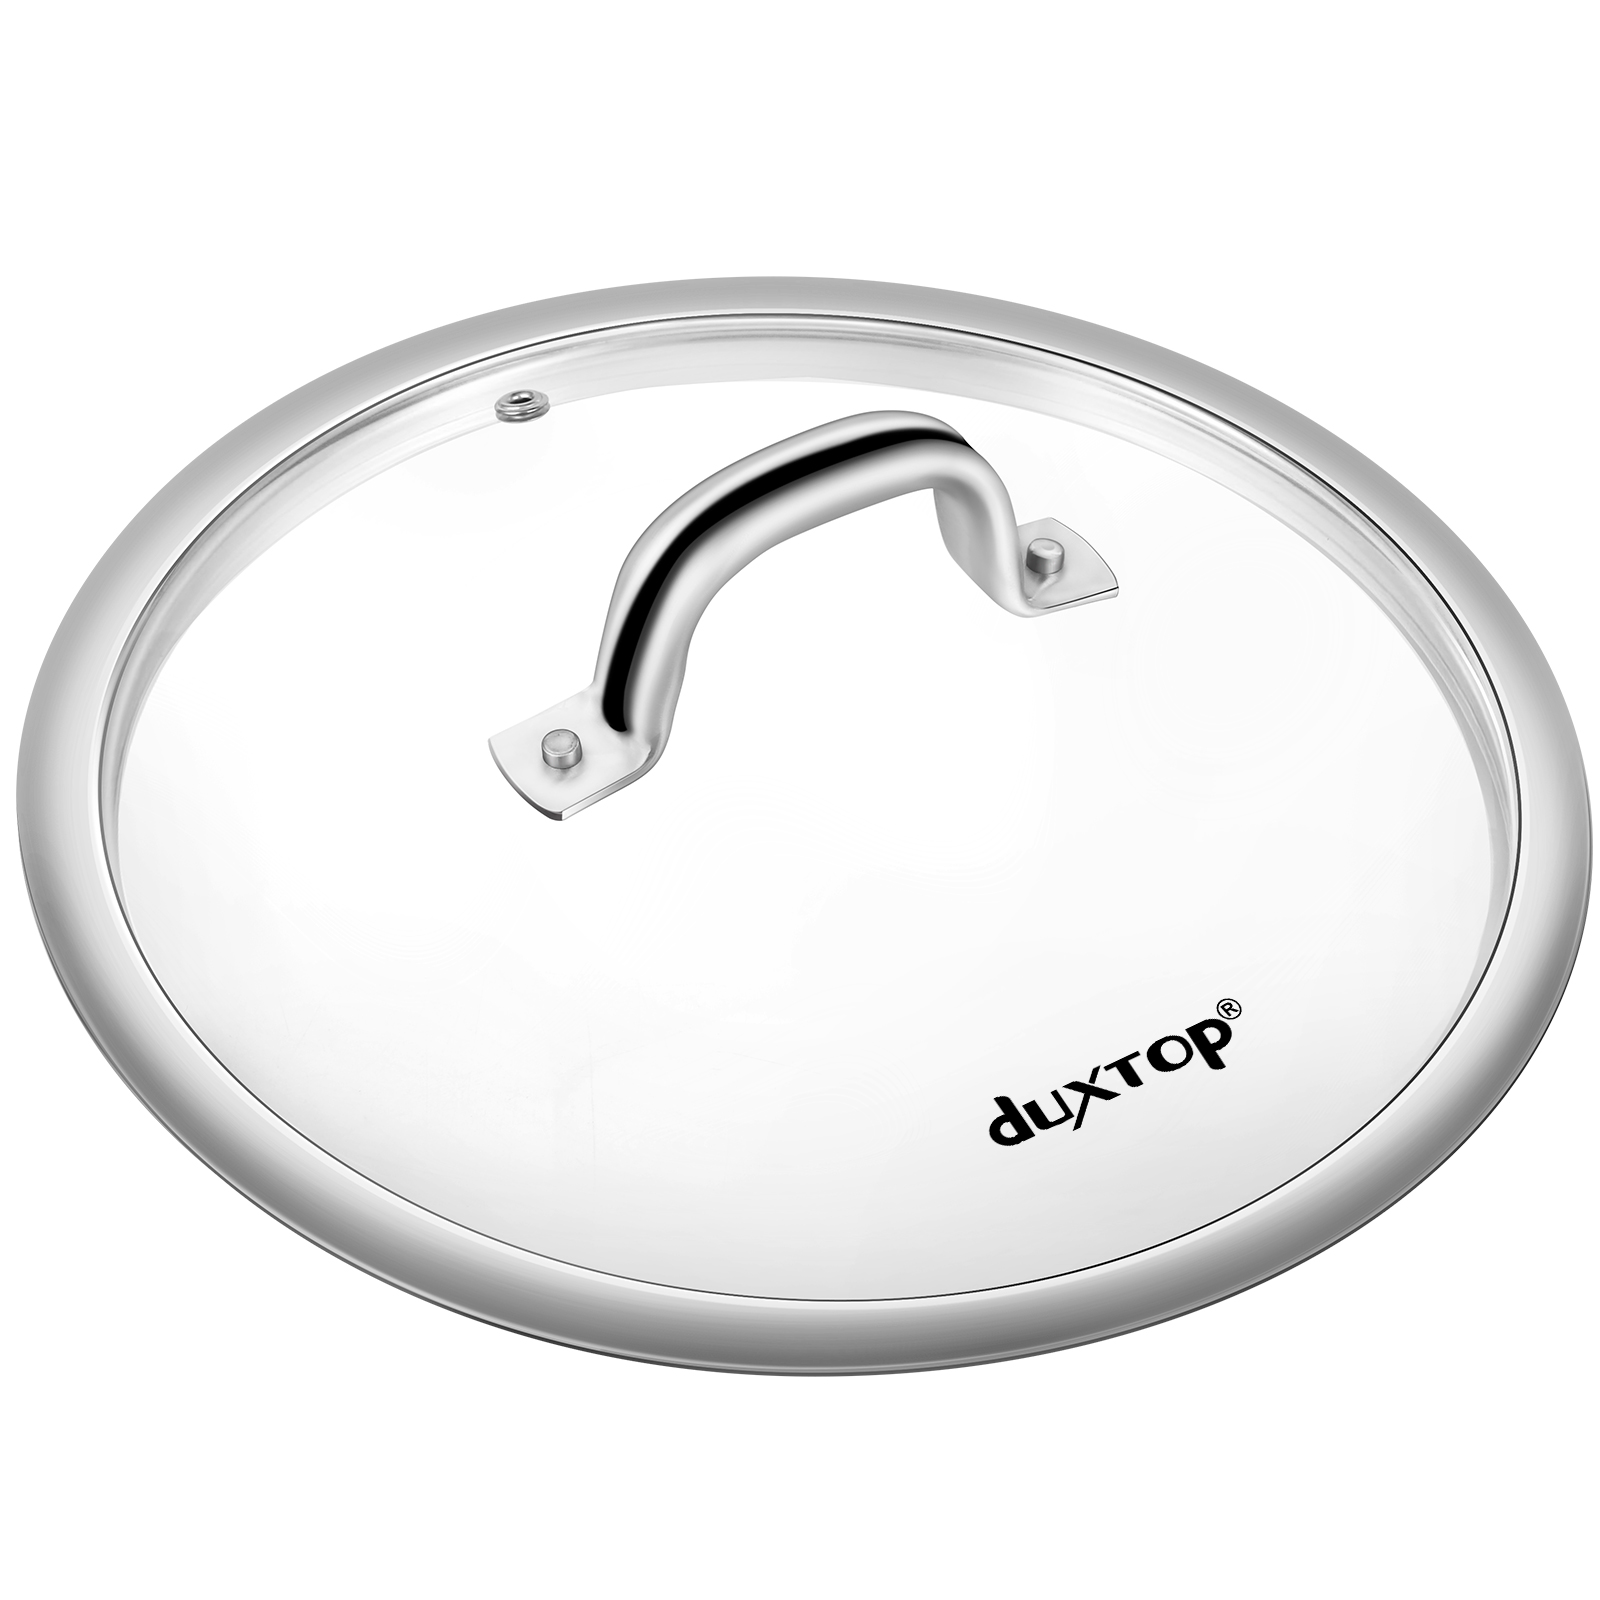 Duxtop Cookware Glass Replacement Lid (11 Inches) - The Secura